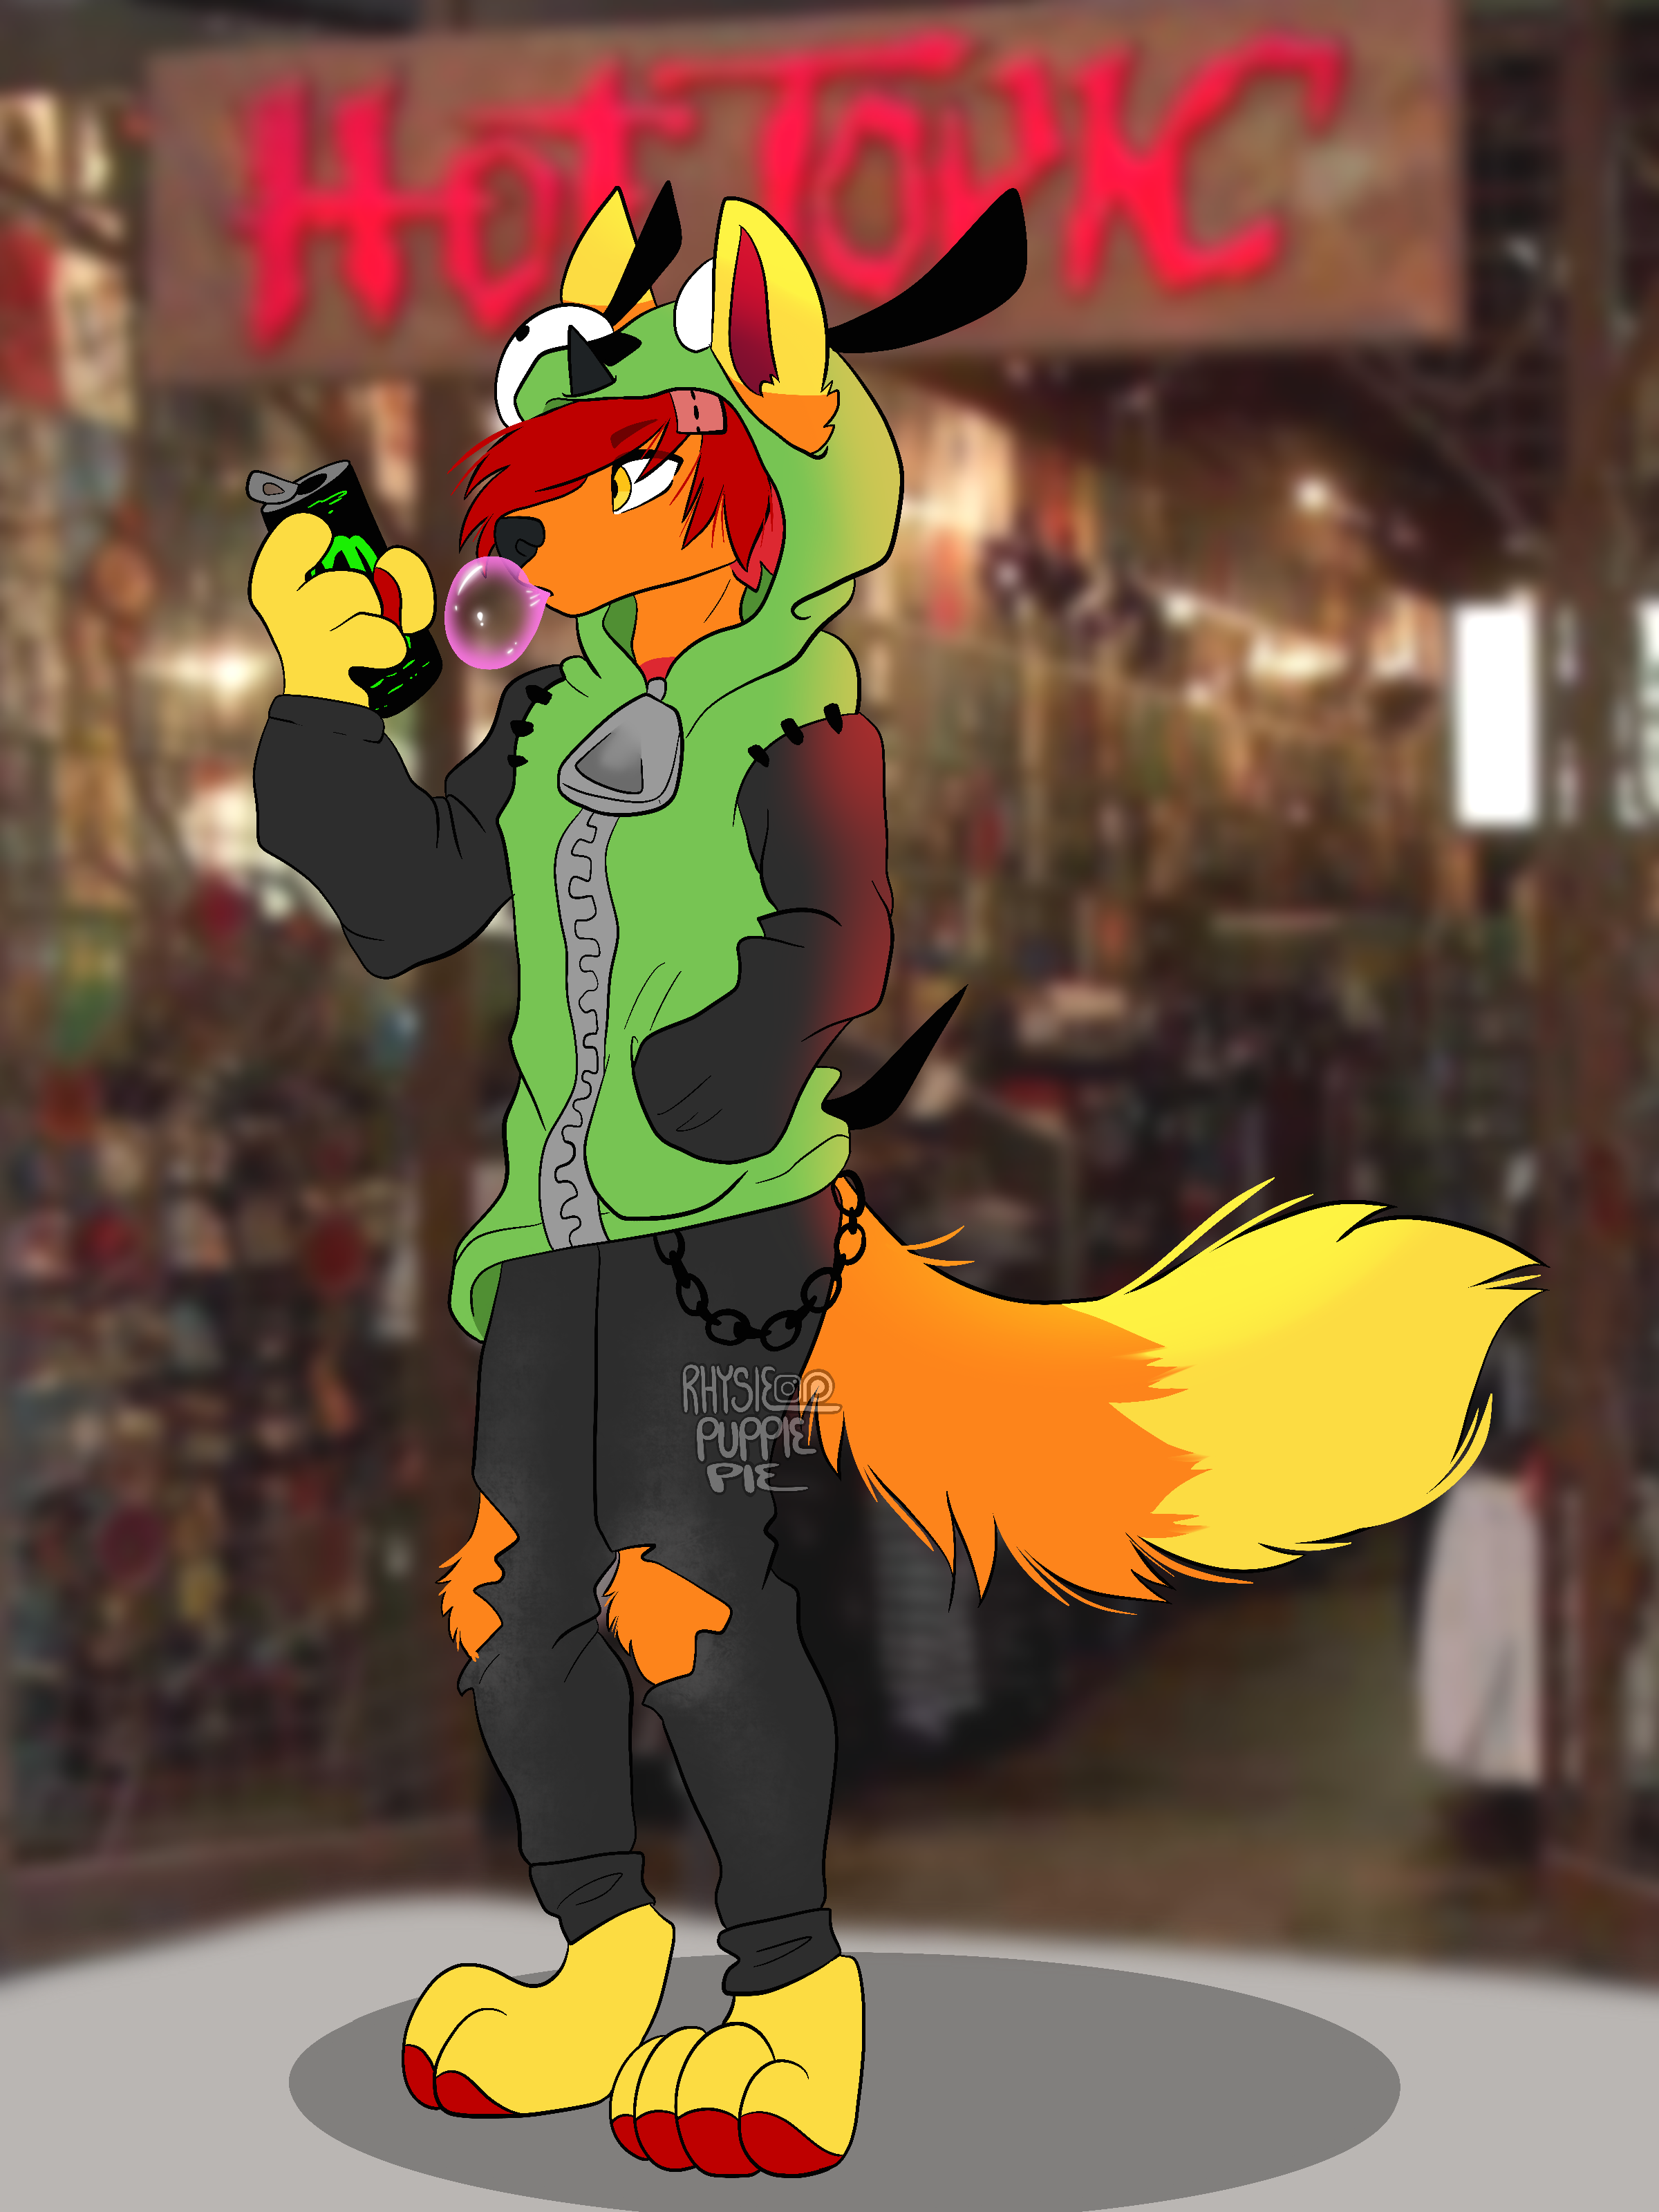 A digital drawing of Lexicon standing in front of a Hot Topic store, chewing bubblegum and holding a can of Monster Energy. They are wearing an Invader Zim GIR hoodie, a wallet chain, and black pants with holes ripped around the knees.